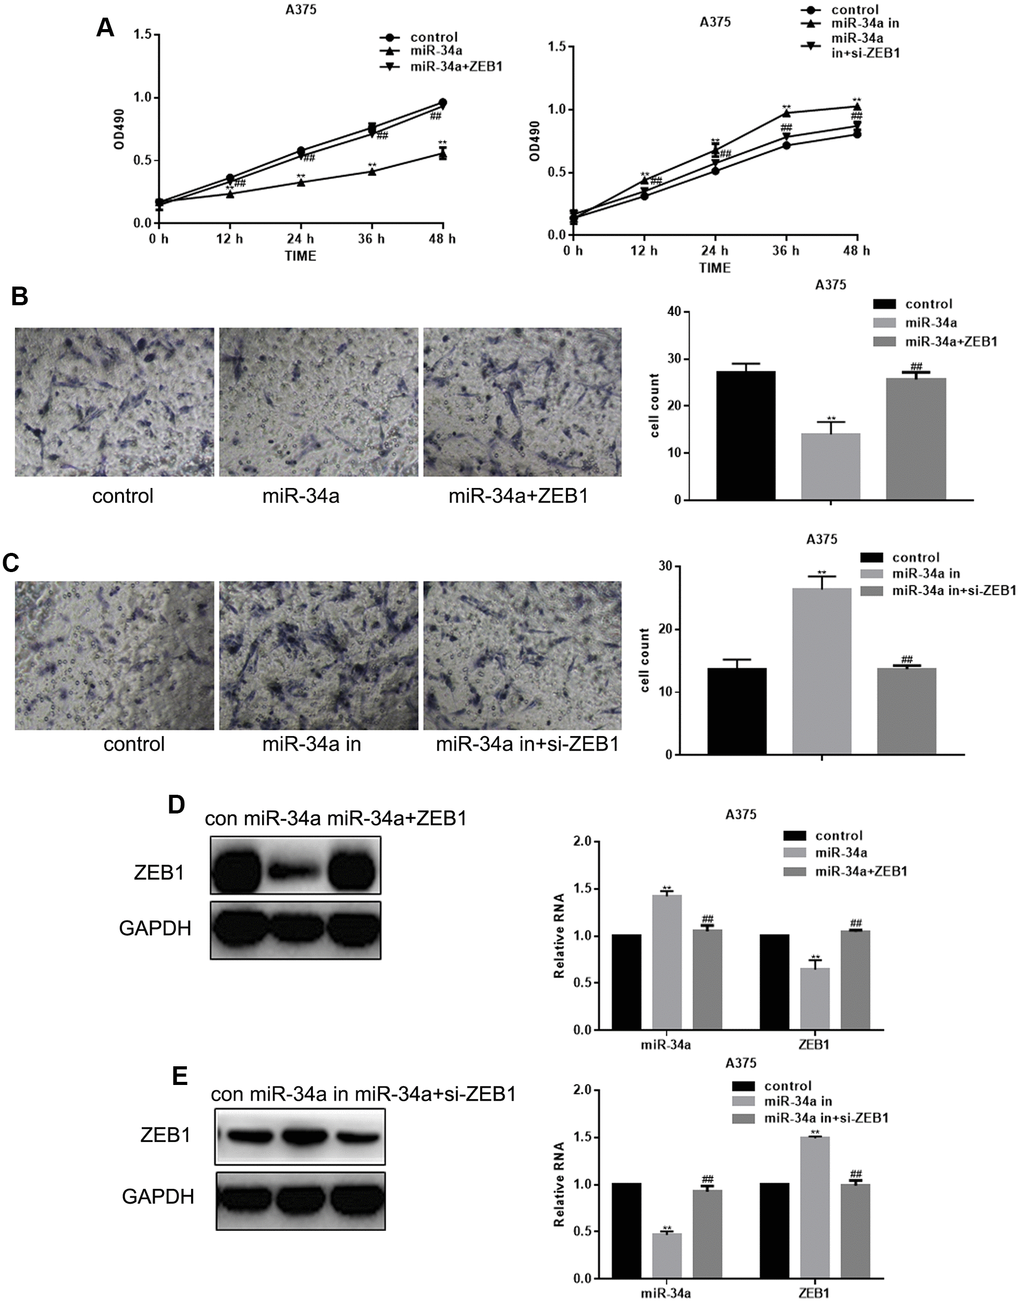 miR-34a inhibits proliferation and migration of melanoma cells by targeting ZEB1. (A) MTT cell proliferation assay in A375 cells with increased and suppressed miR-34a expression, and transfected with ZEB1 or ZEB1 siRNA (mean ± SEM; ** PPB) Transwell migration assay in A375 cells overexpressing miR-34a and transfected with ZEB1 (mean ± SEM; ** PPC) Transwell migration assay of A375 cells with downregulated miR-34a and transfected with si-ZEB1 (mean ± SEM. ** PPD) Western blotting and real-time PCR analysis of miR-34a and ZEB1 in A375 cells transfected with ZEB1 and overexpressing miR-34a (mean ± SEM; ** PPE) Western blotting and real-time PCR analysis of miR-34a and ZEB1 in A375 cells with downregulated miR-34a and transfected with si-ZEB1 (mean ± SEM; ** PP